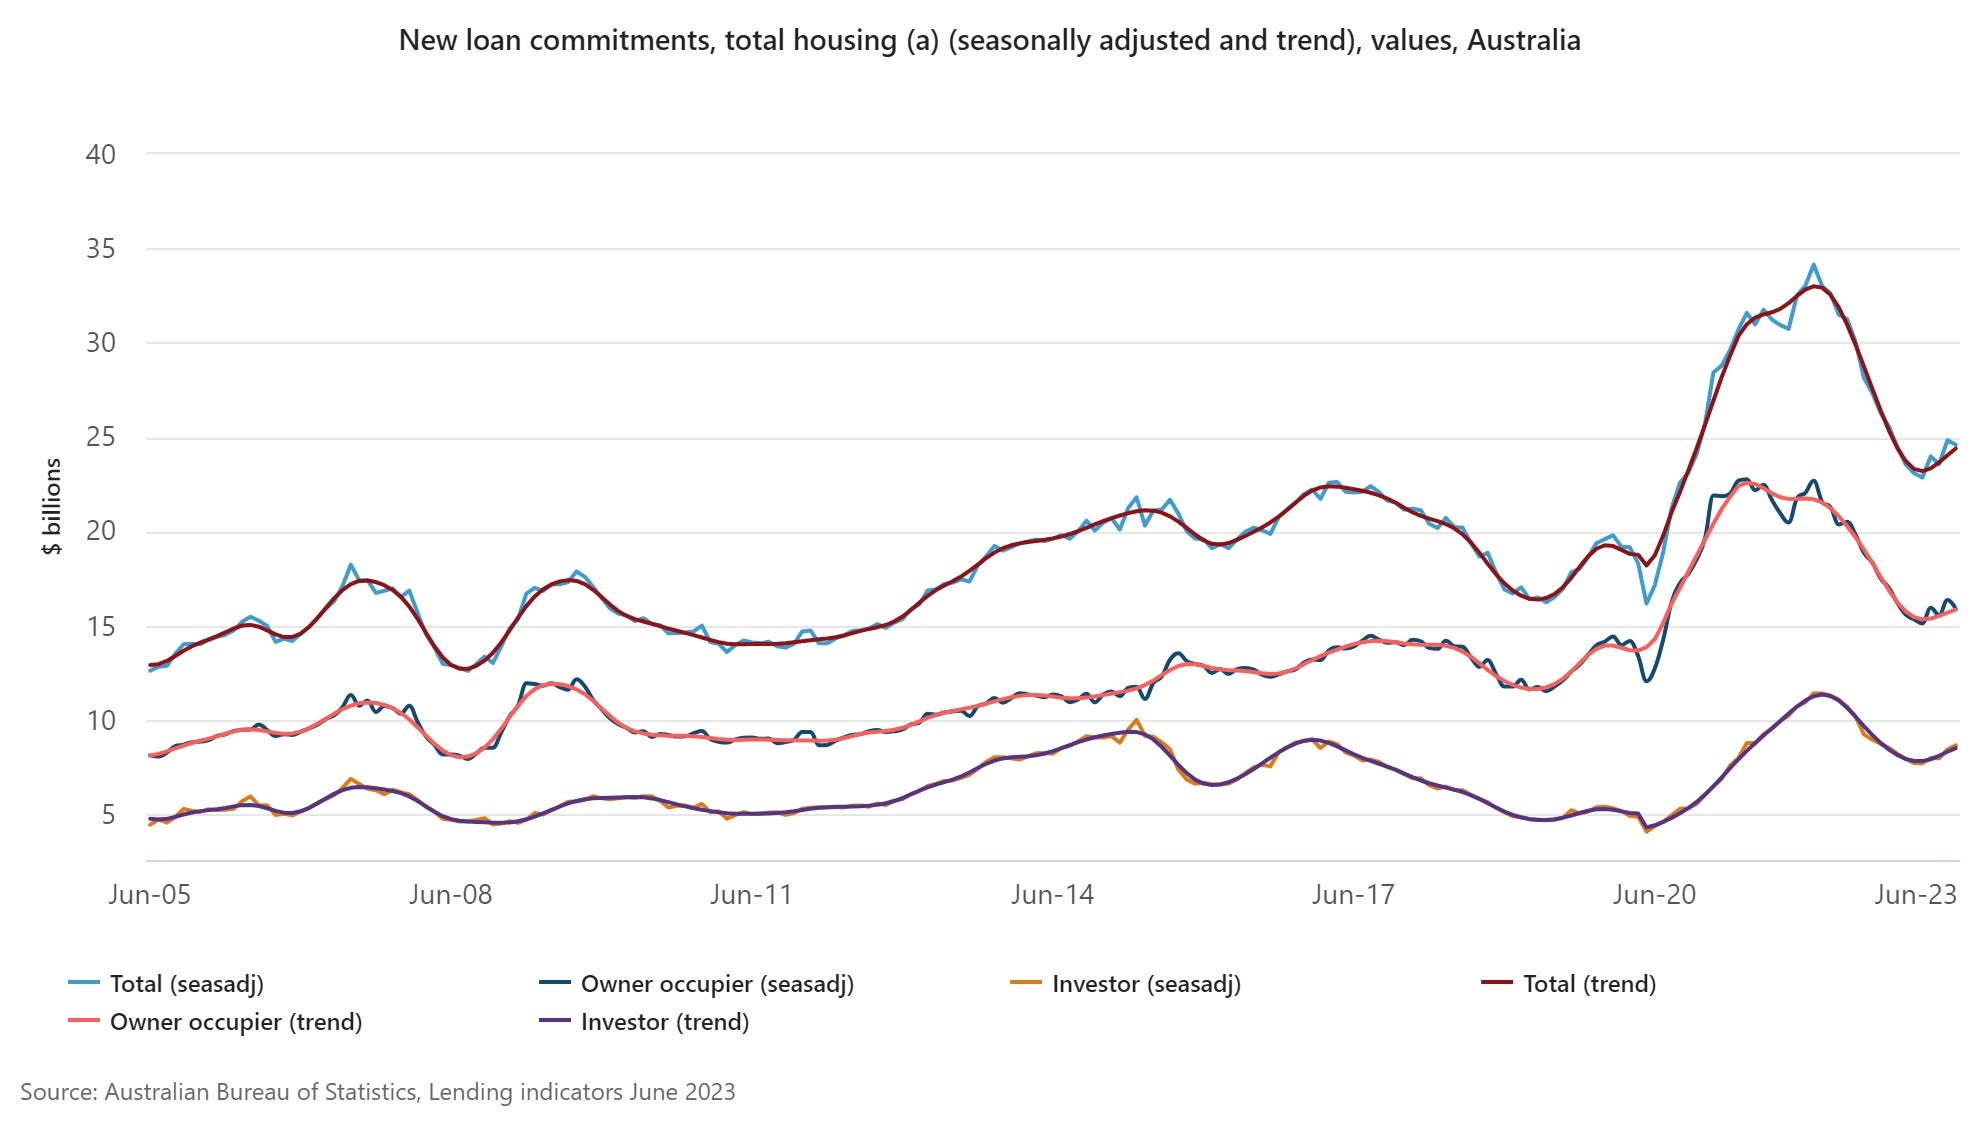 New loan commitments, total housing (a) (seasonally adjusted and trend), values, Australia.jpeg